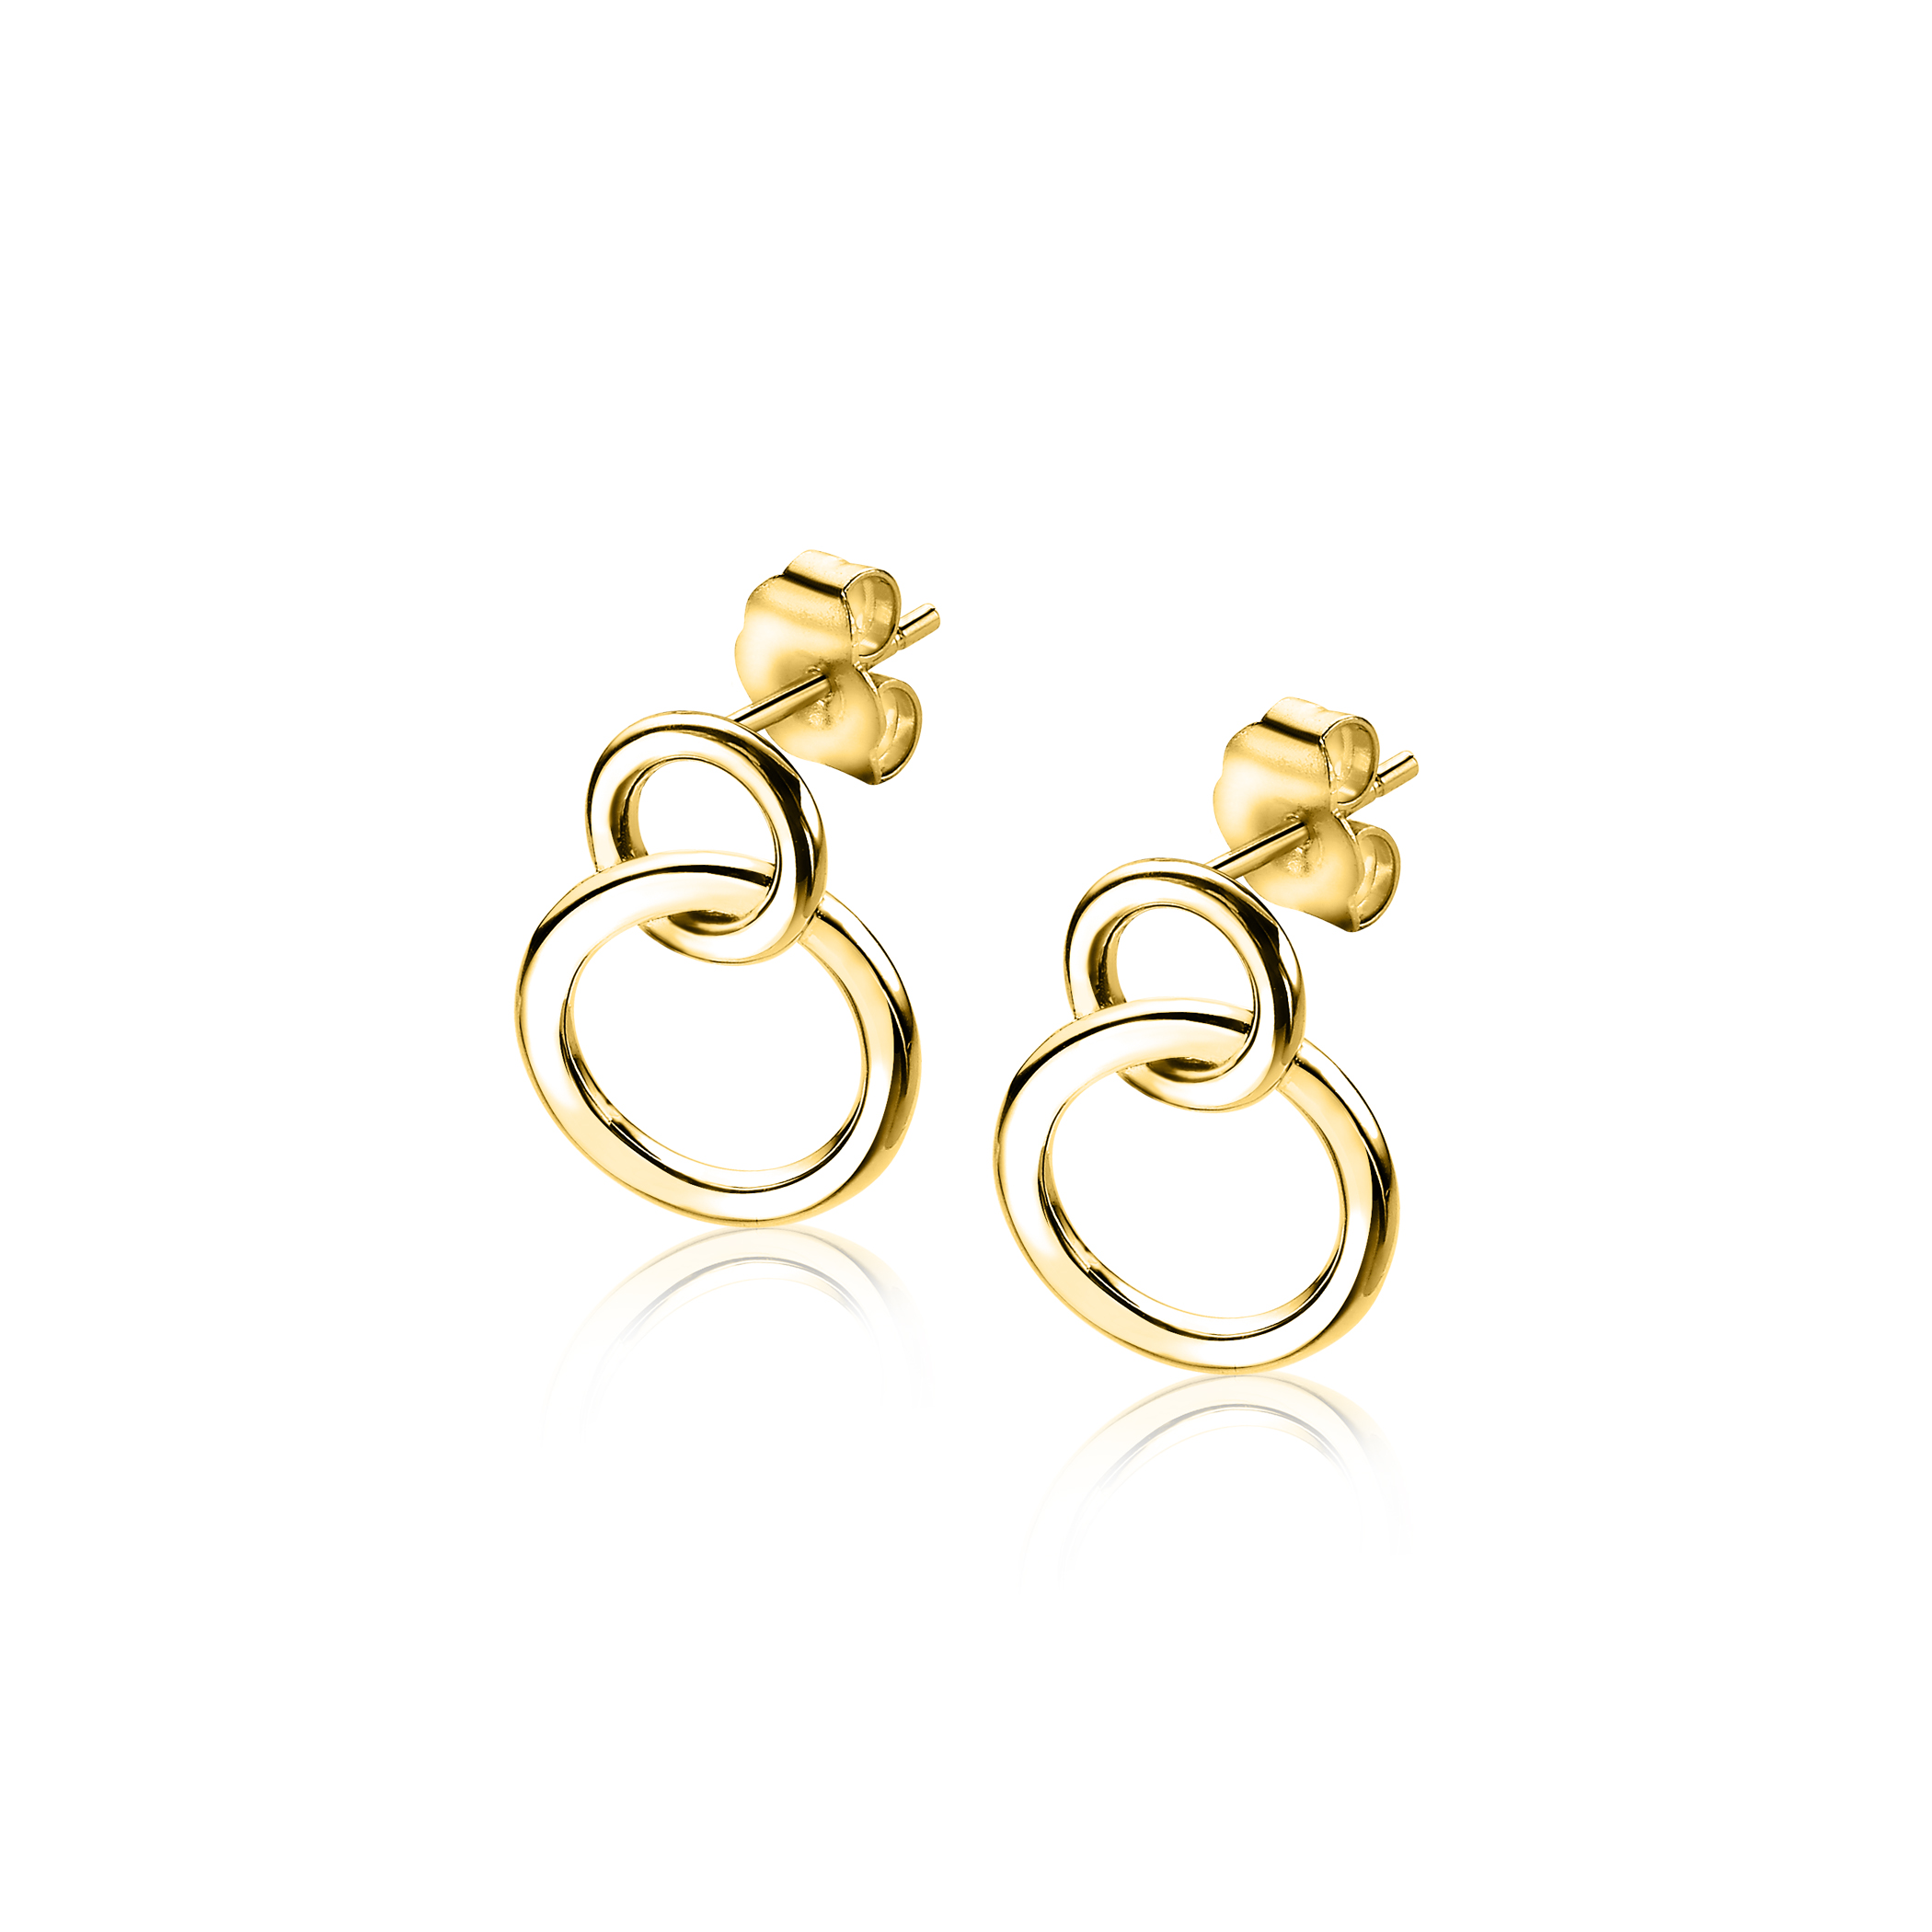 ZINZI Gold Plated Sterling Silver Stud Earrings with 2 Connected Open Circles ZIO1278G